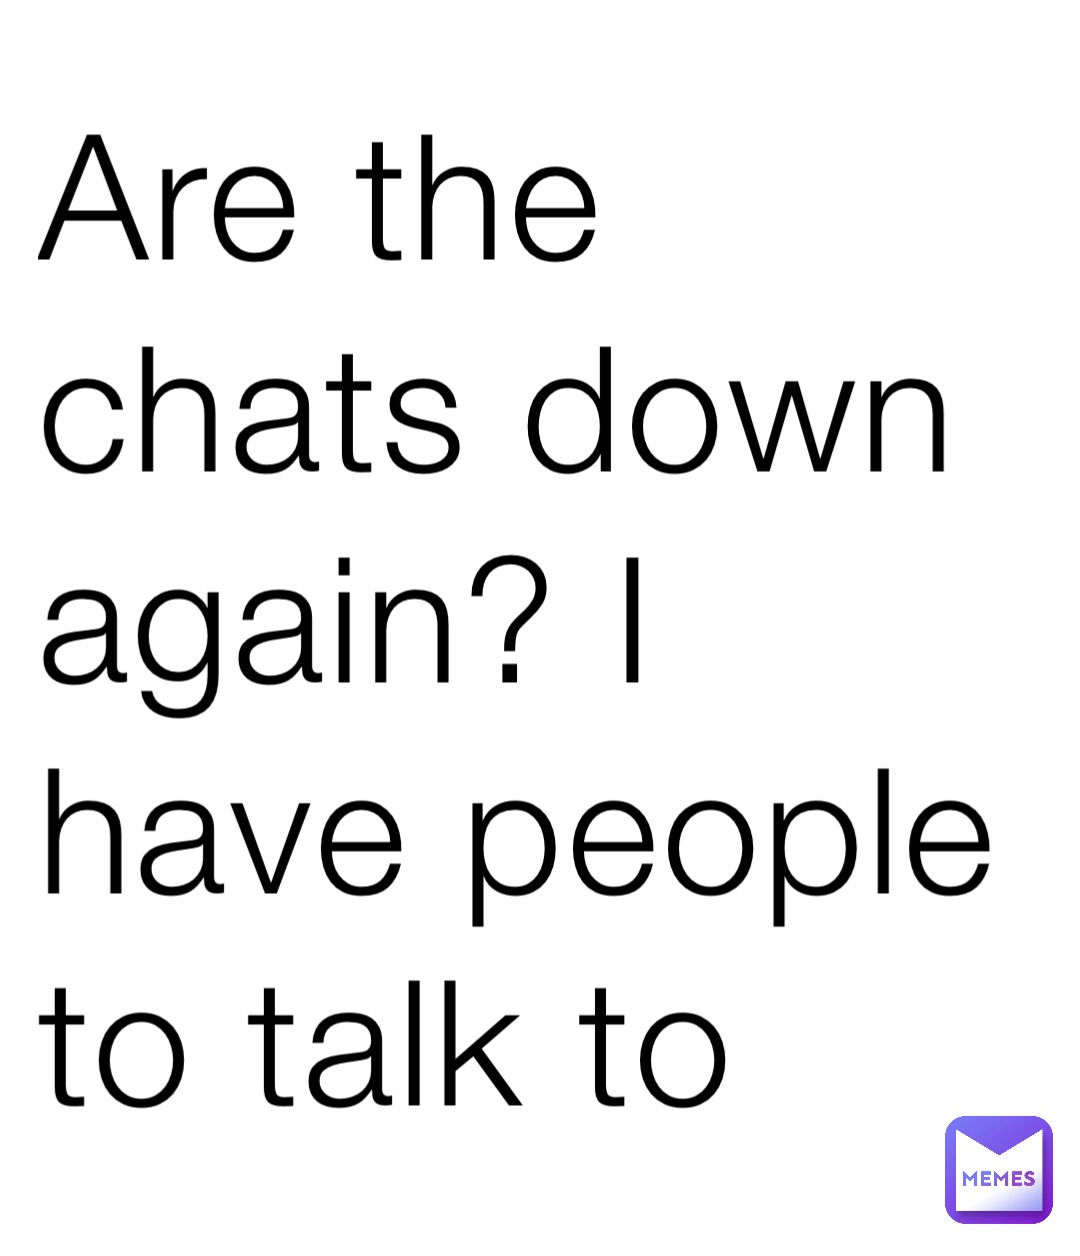 Are the chats down again? I have people to talk to